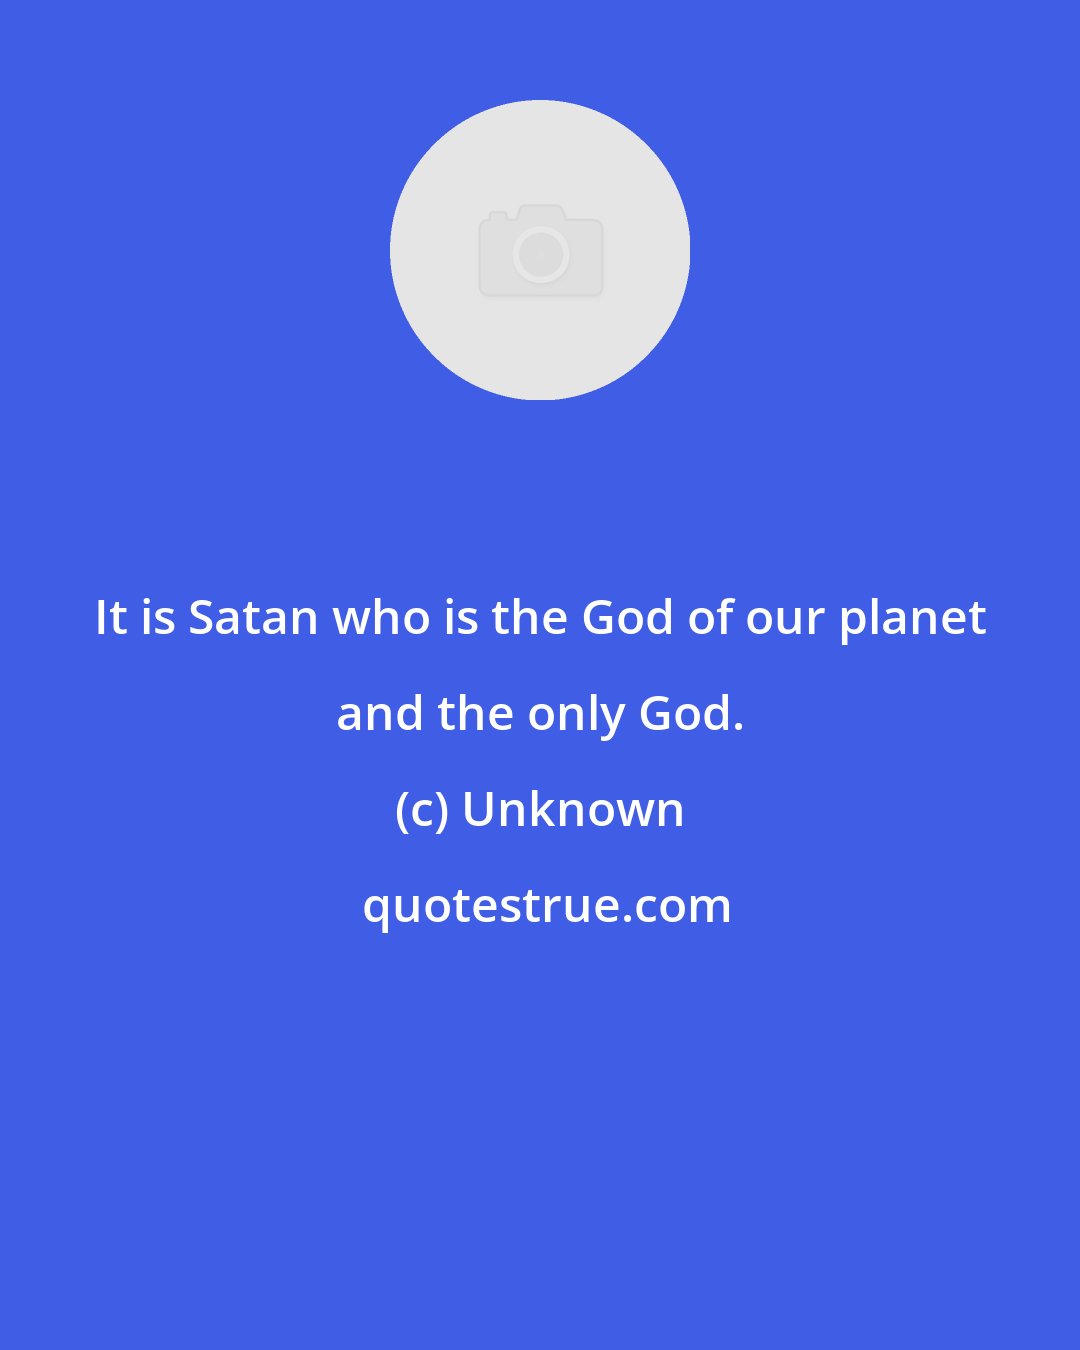 Unknown: It is Satan who is the God of our planet and the only God.